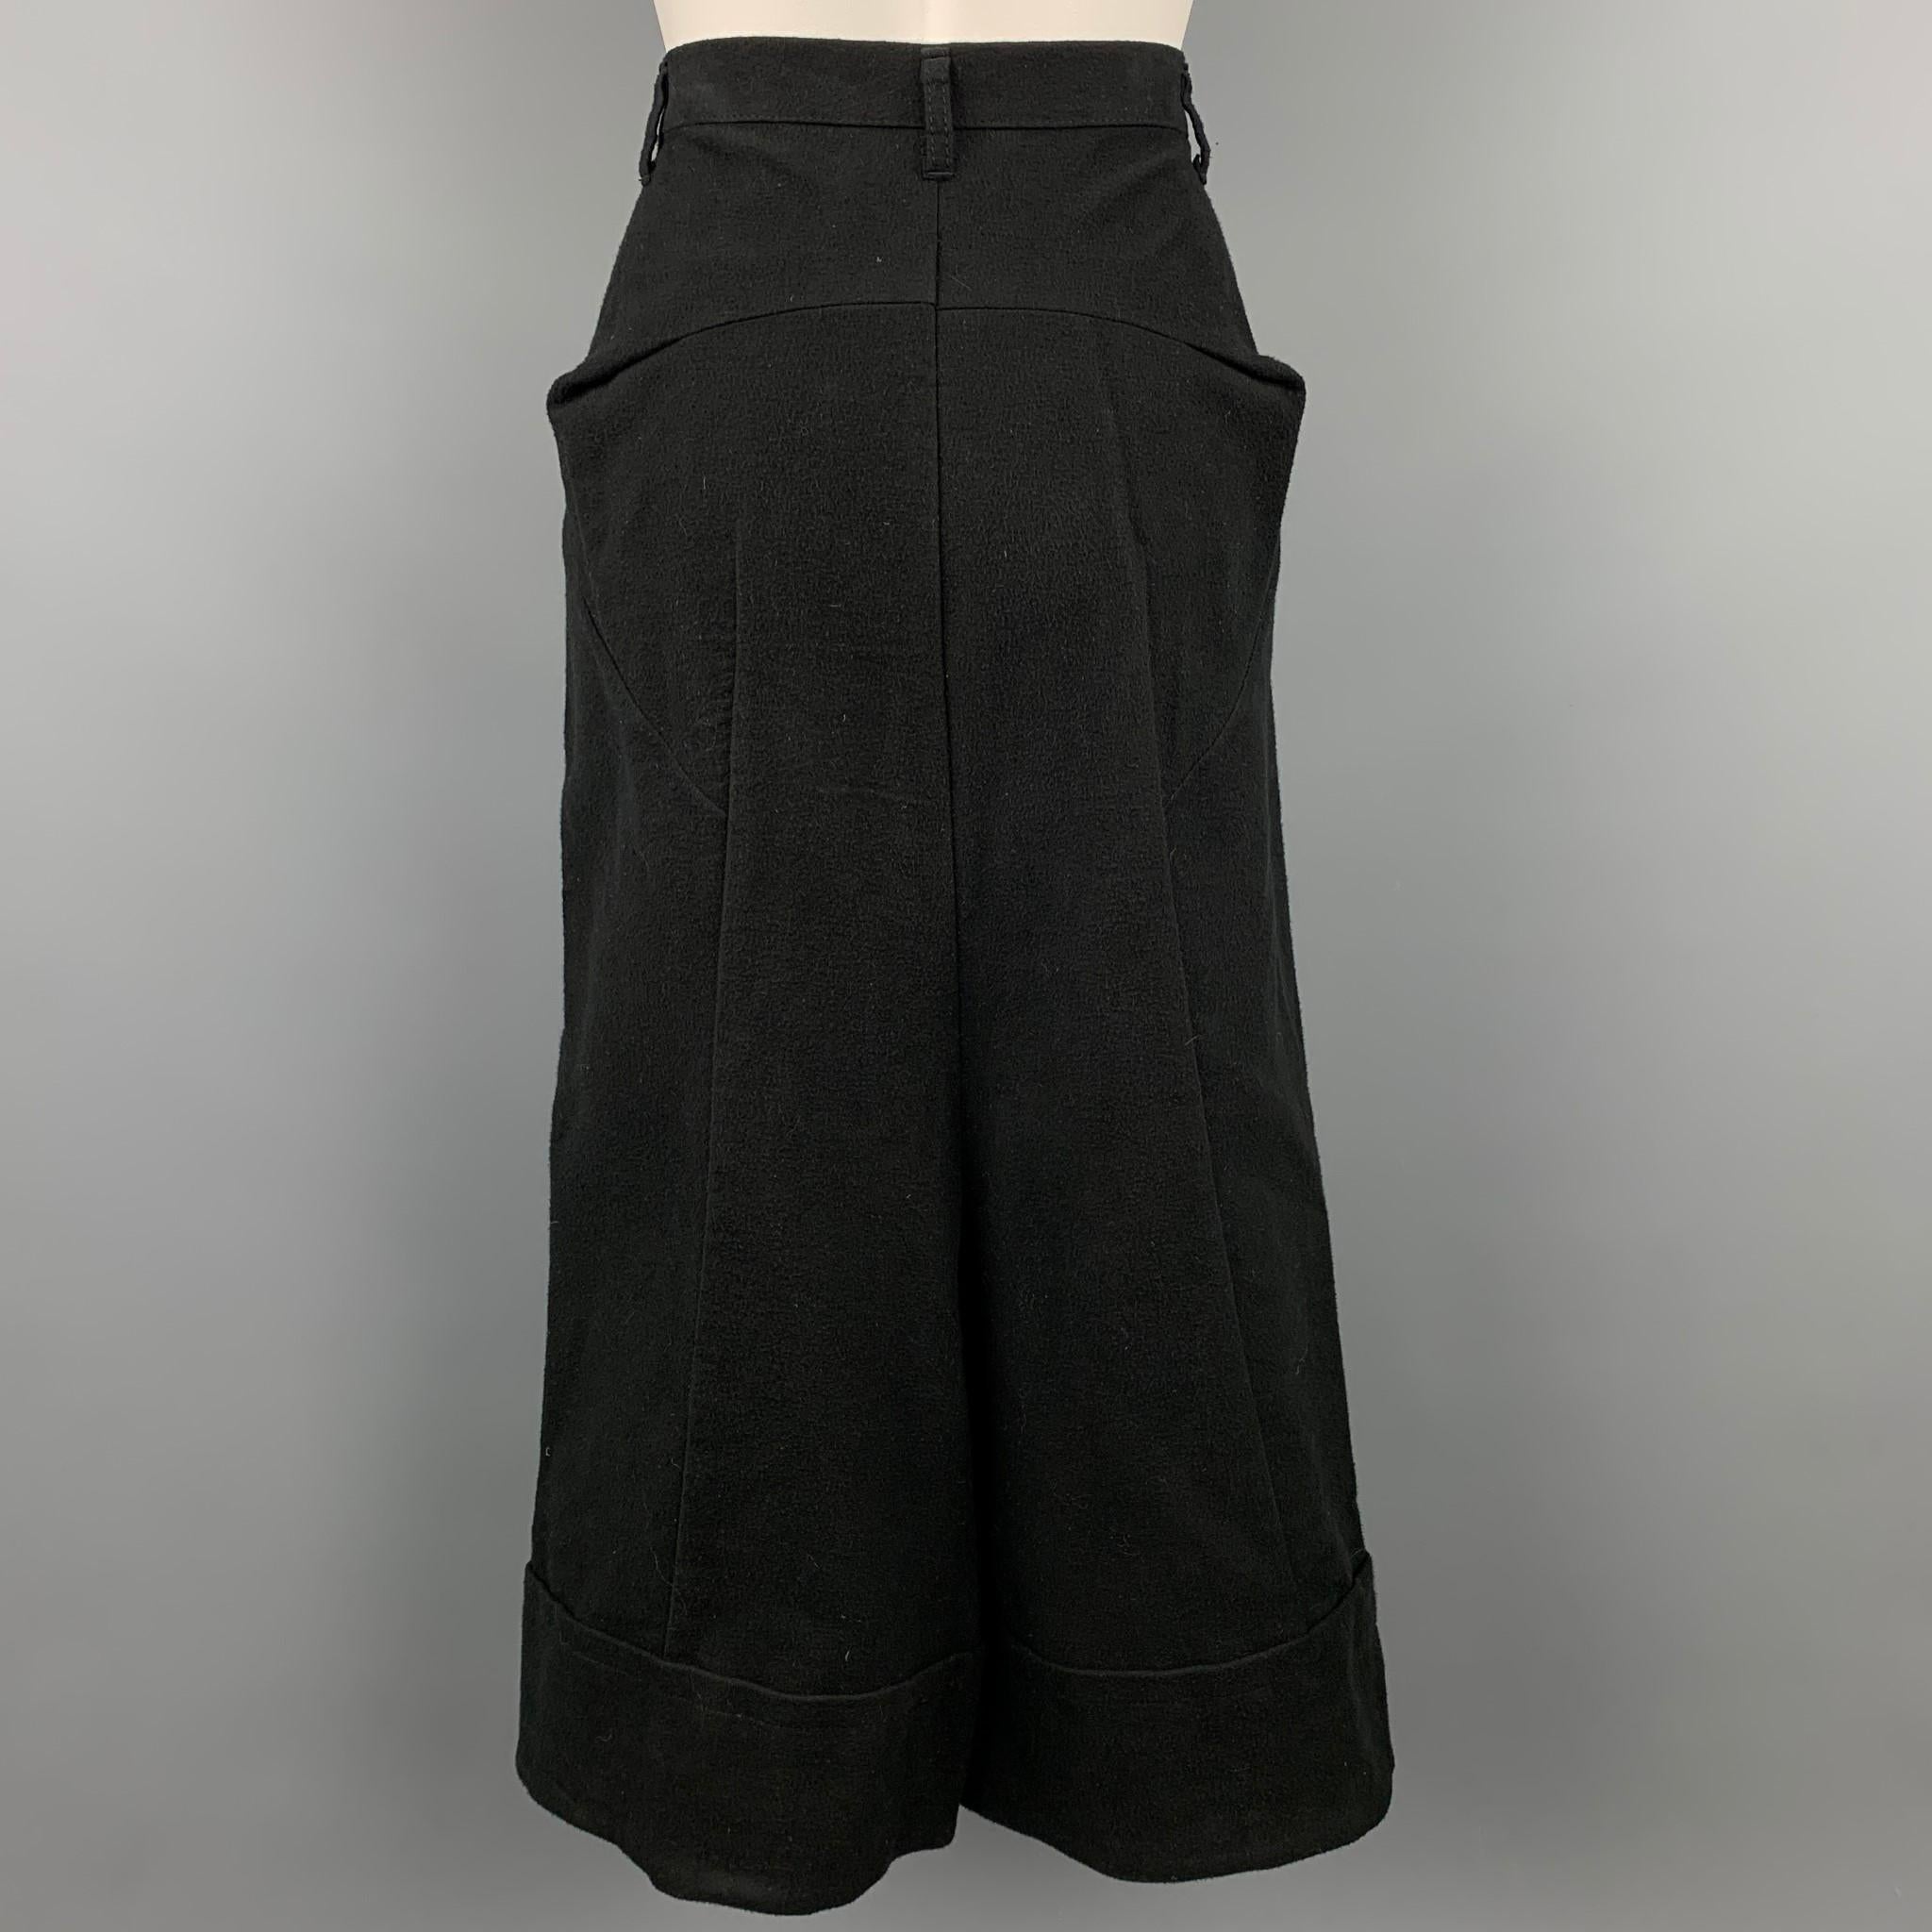 COMME des GARCONS TRICOT casual pants comes in a black cotton featuring a drop crotch style, wide leg, and a zip fly closure. Made in Japan.

Very Good  Pre-Owned Condition.
Marked: M / AD2014

Measurements:

Waist:  28 in.
Rise: 25. in.
Inseam: 11